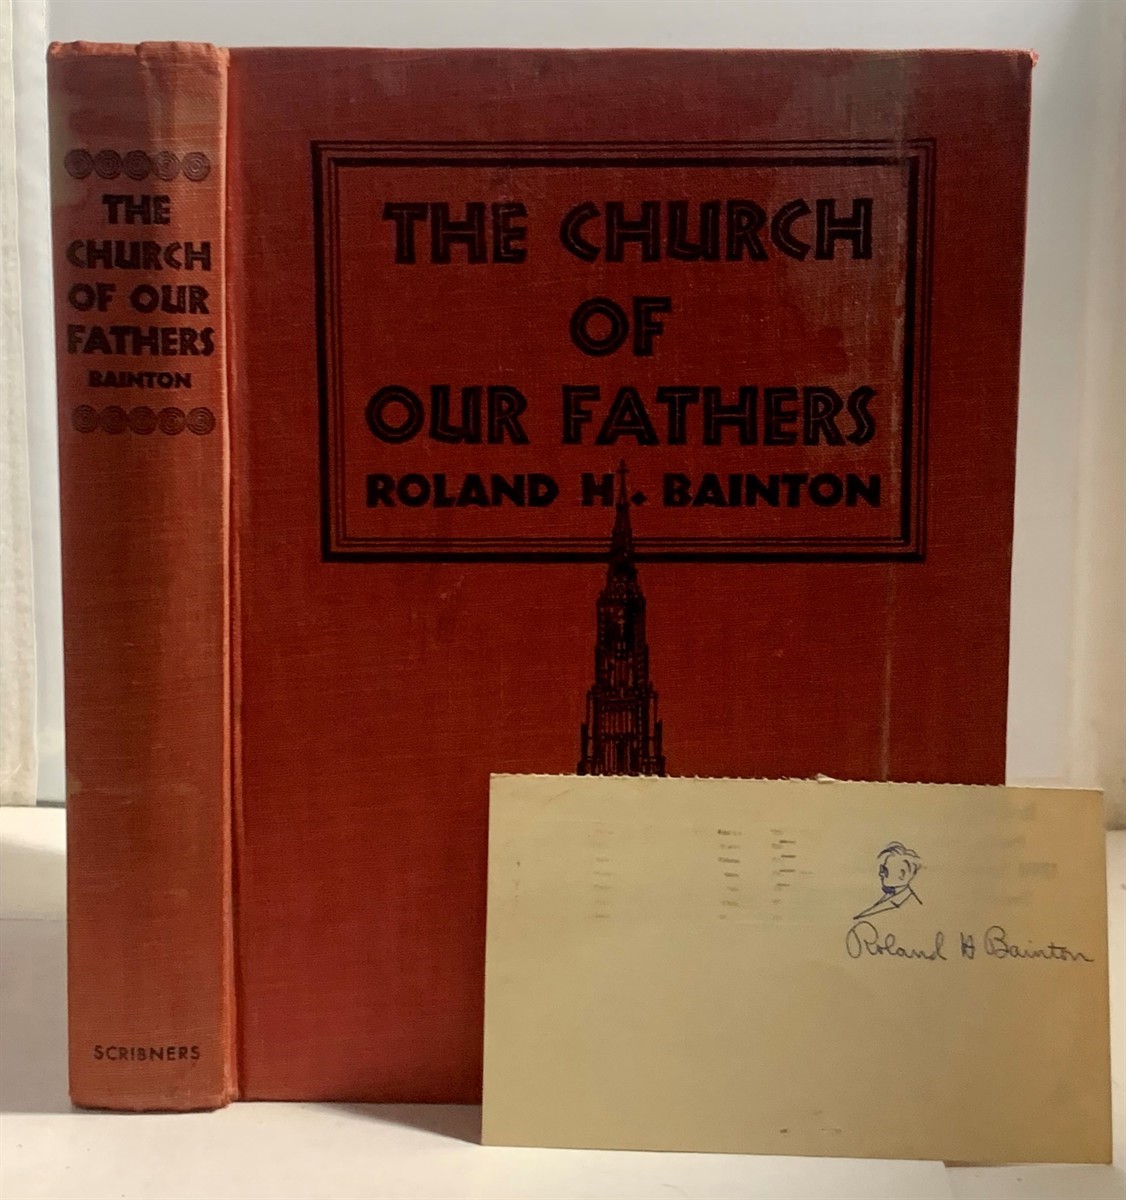 BAINTON, ROLAND H. - The Church of Our Fathers